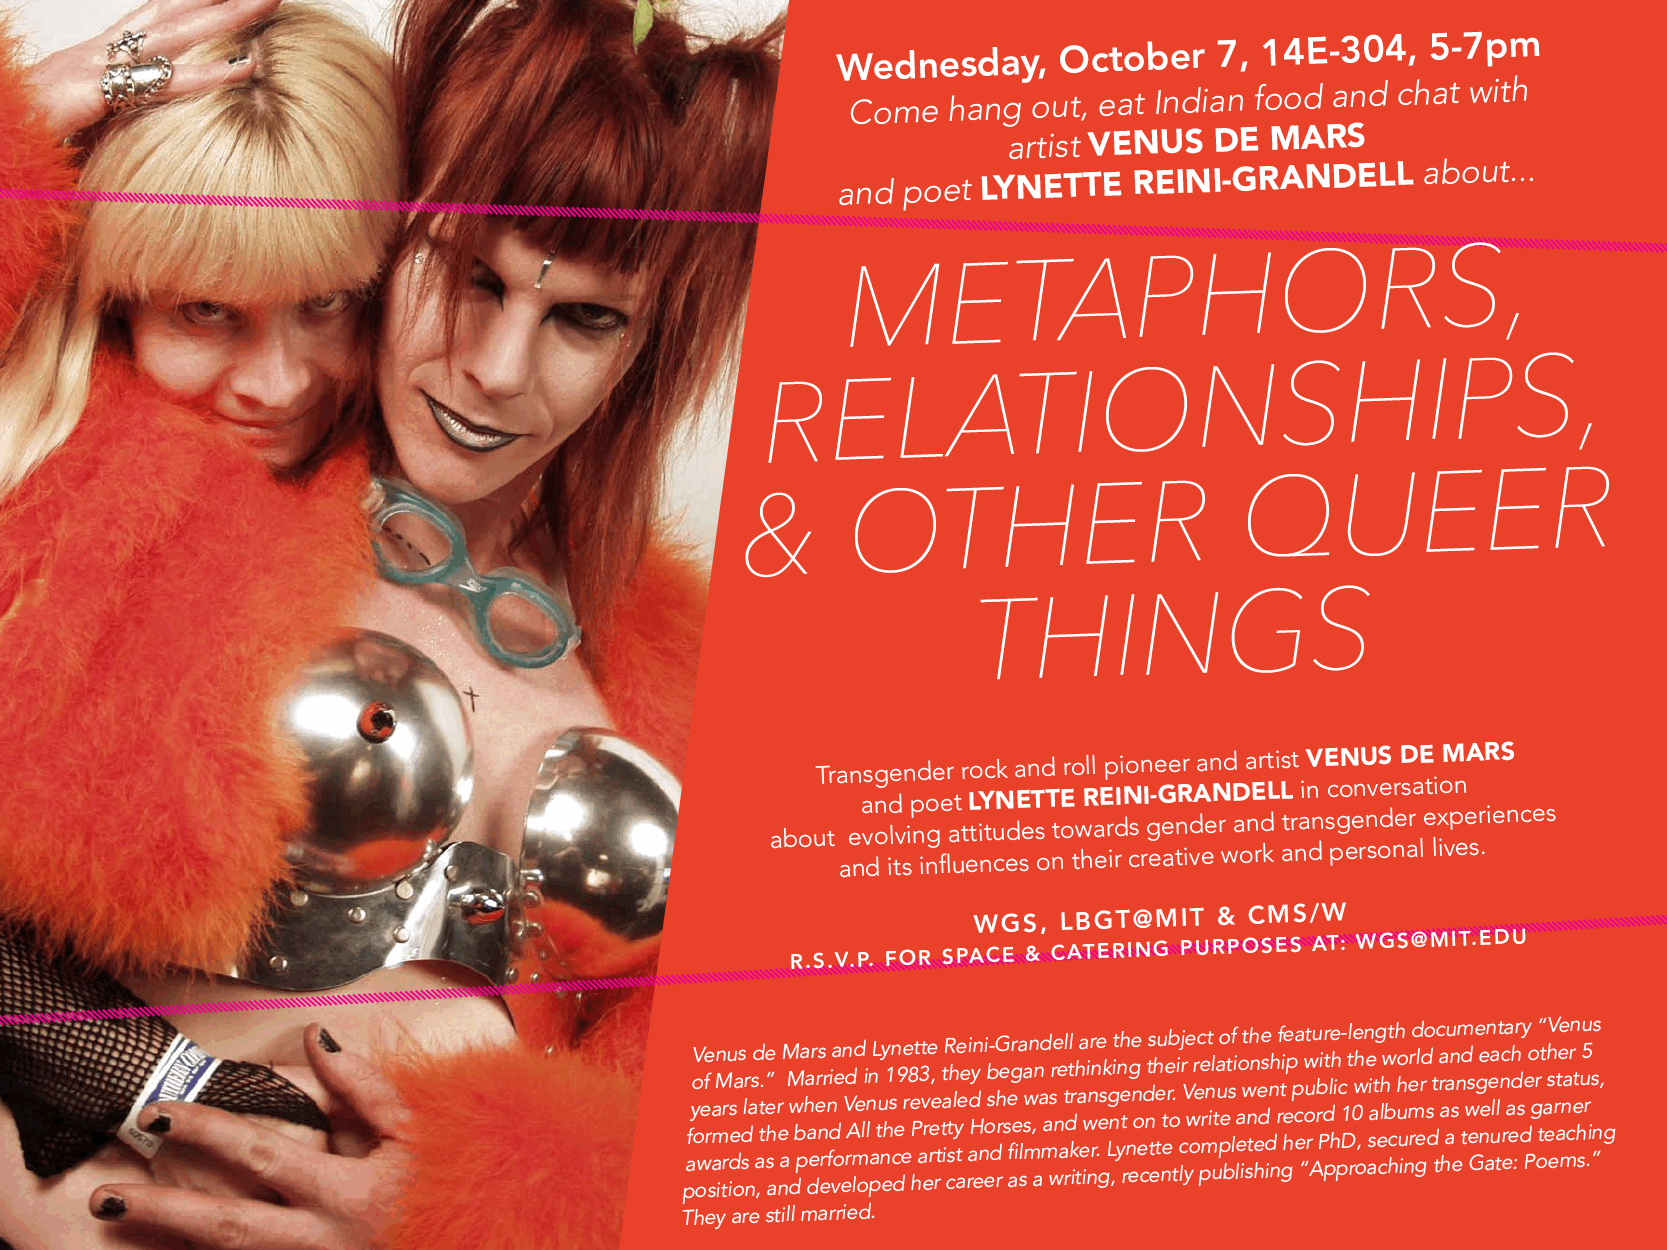 Metaphors, Relationships & Other Queer Things, Oct 7, 14E-304, 5-7:00pm